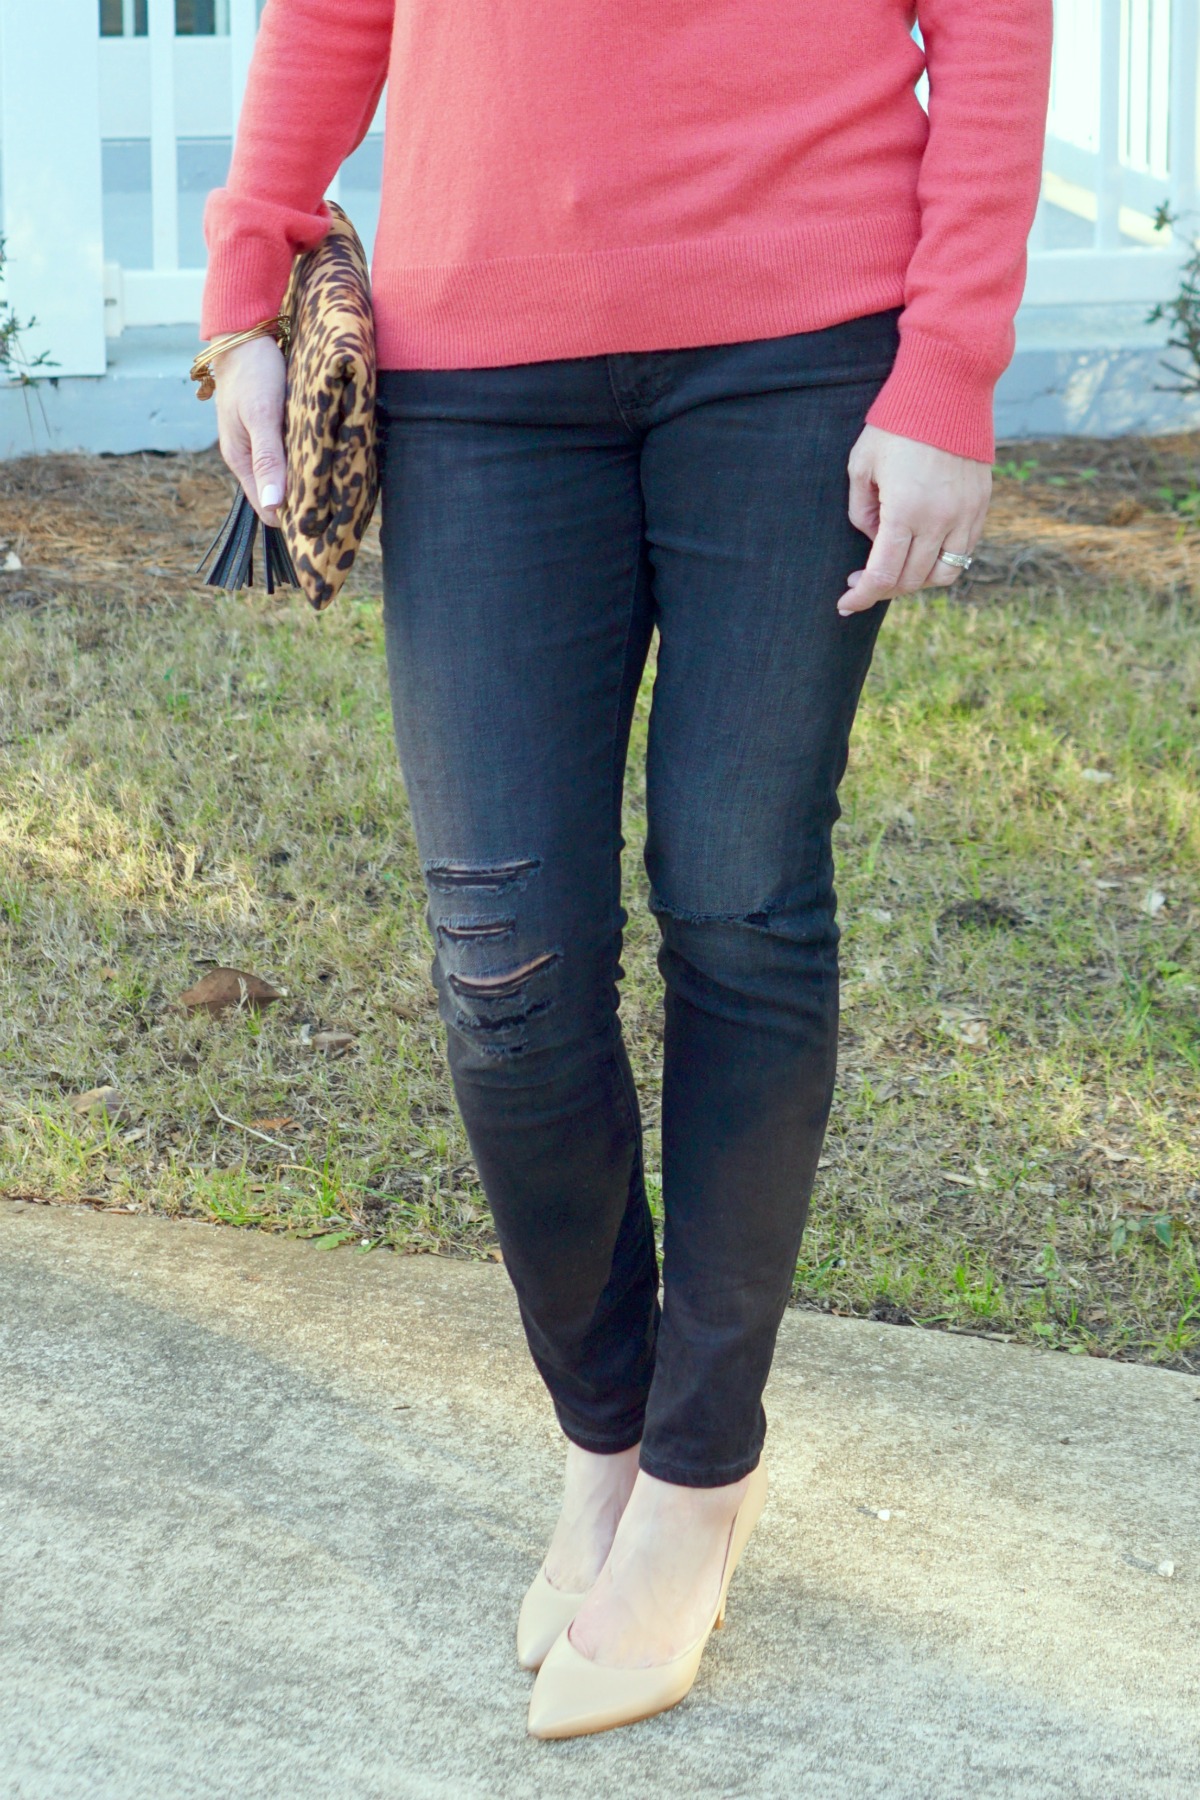 Fashion Over 40: Ann Taylor Cashmere Sweater, Ripped Jeans, AG Ankle Leggings in Twilight, leopard foldover clutch, Charles D Pact Pumps, nude pumps